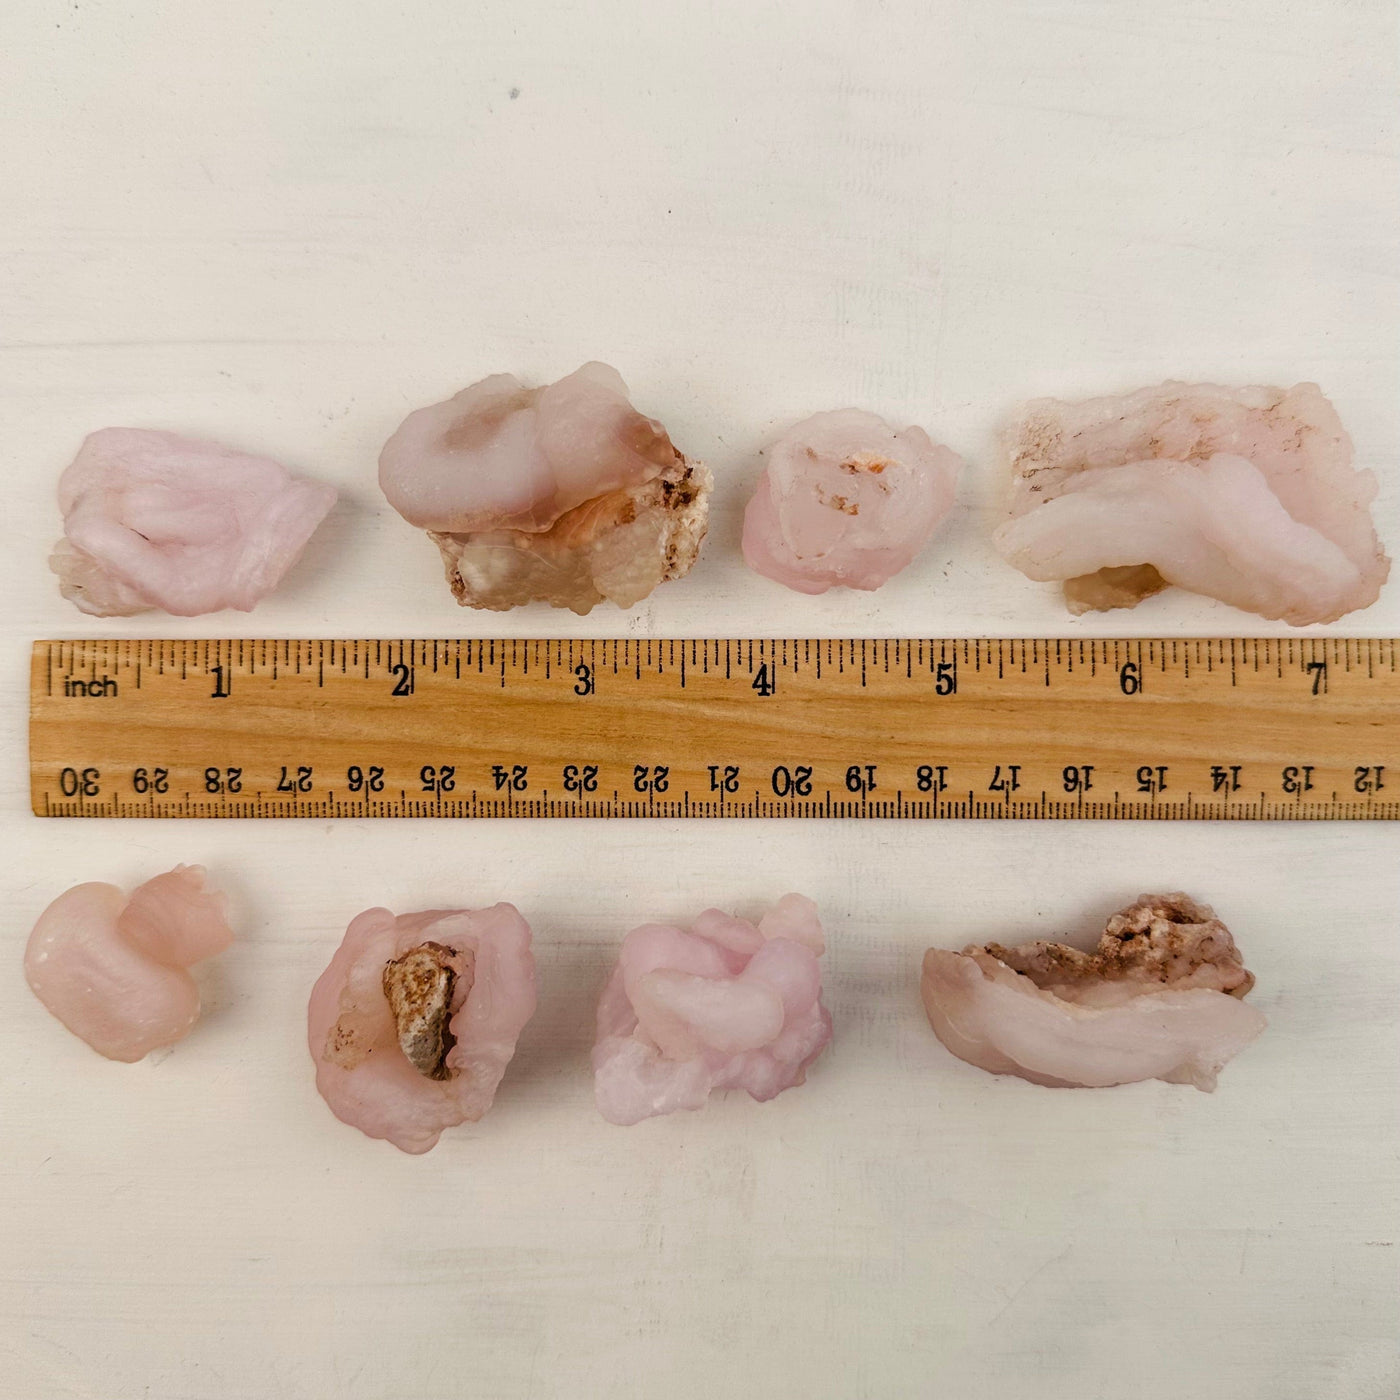 Chalcedony Rosettes - Pink Chalcedony next to a ruler for size reference 